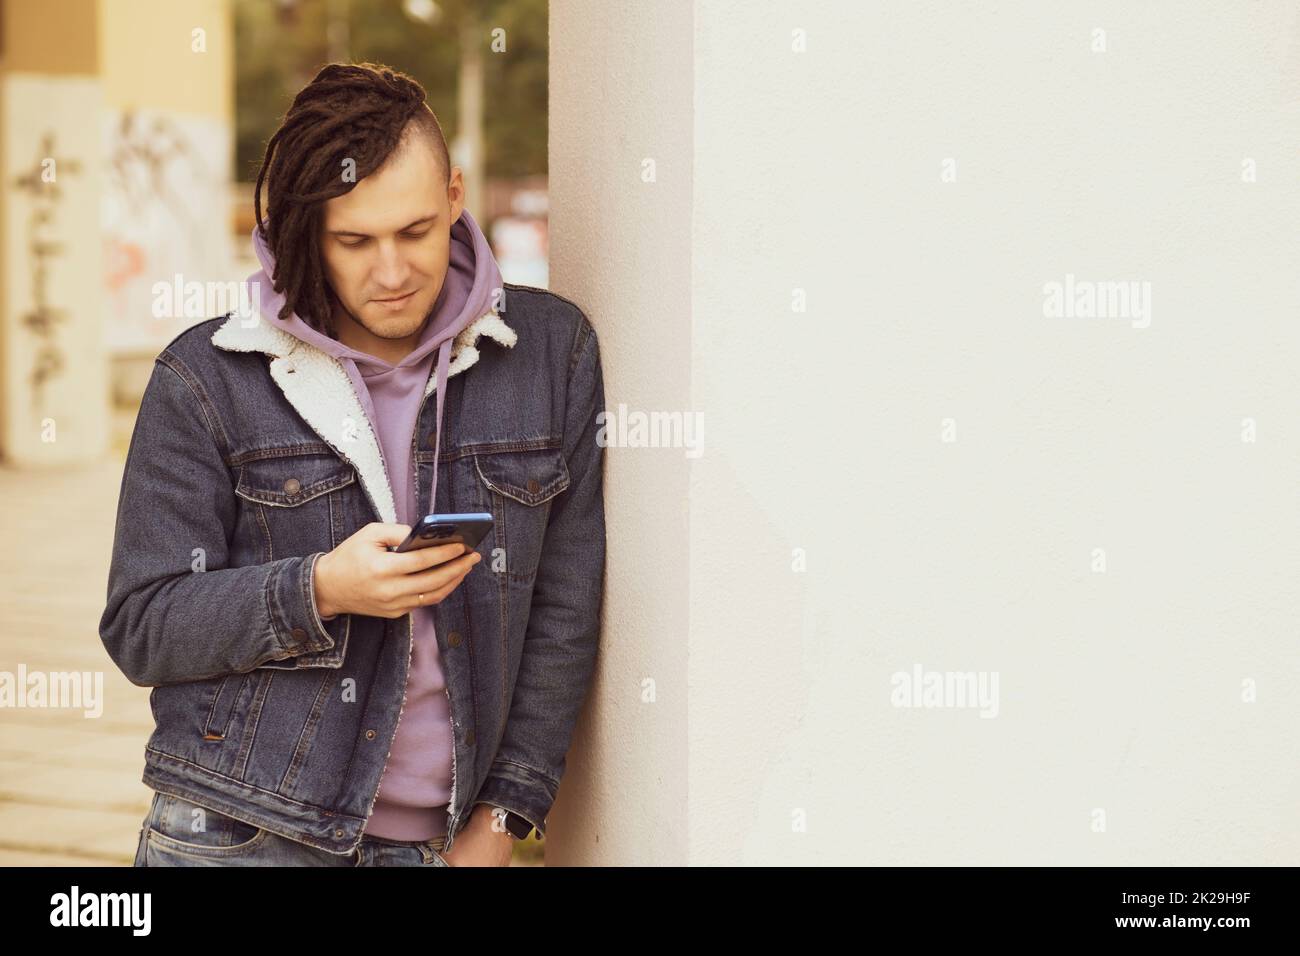 Portrait of young handsome man with dreadlocks browsing mobile phone, standing, leaning against wall on street Stock Photo